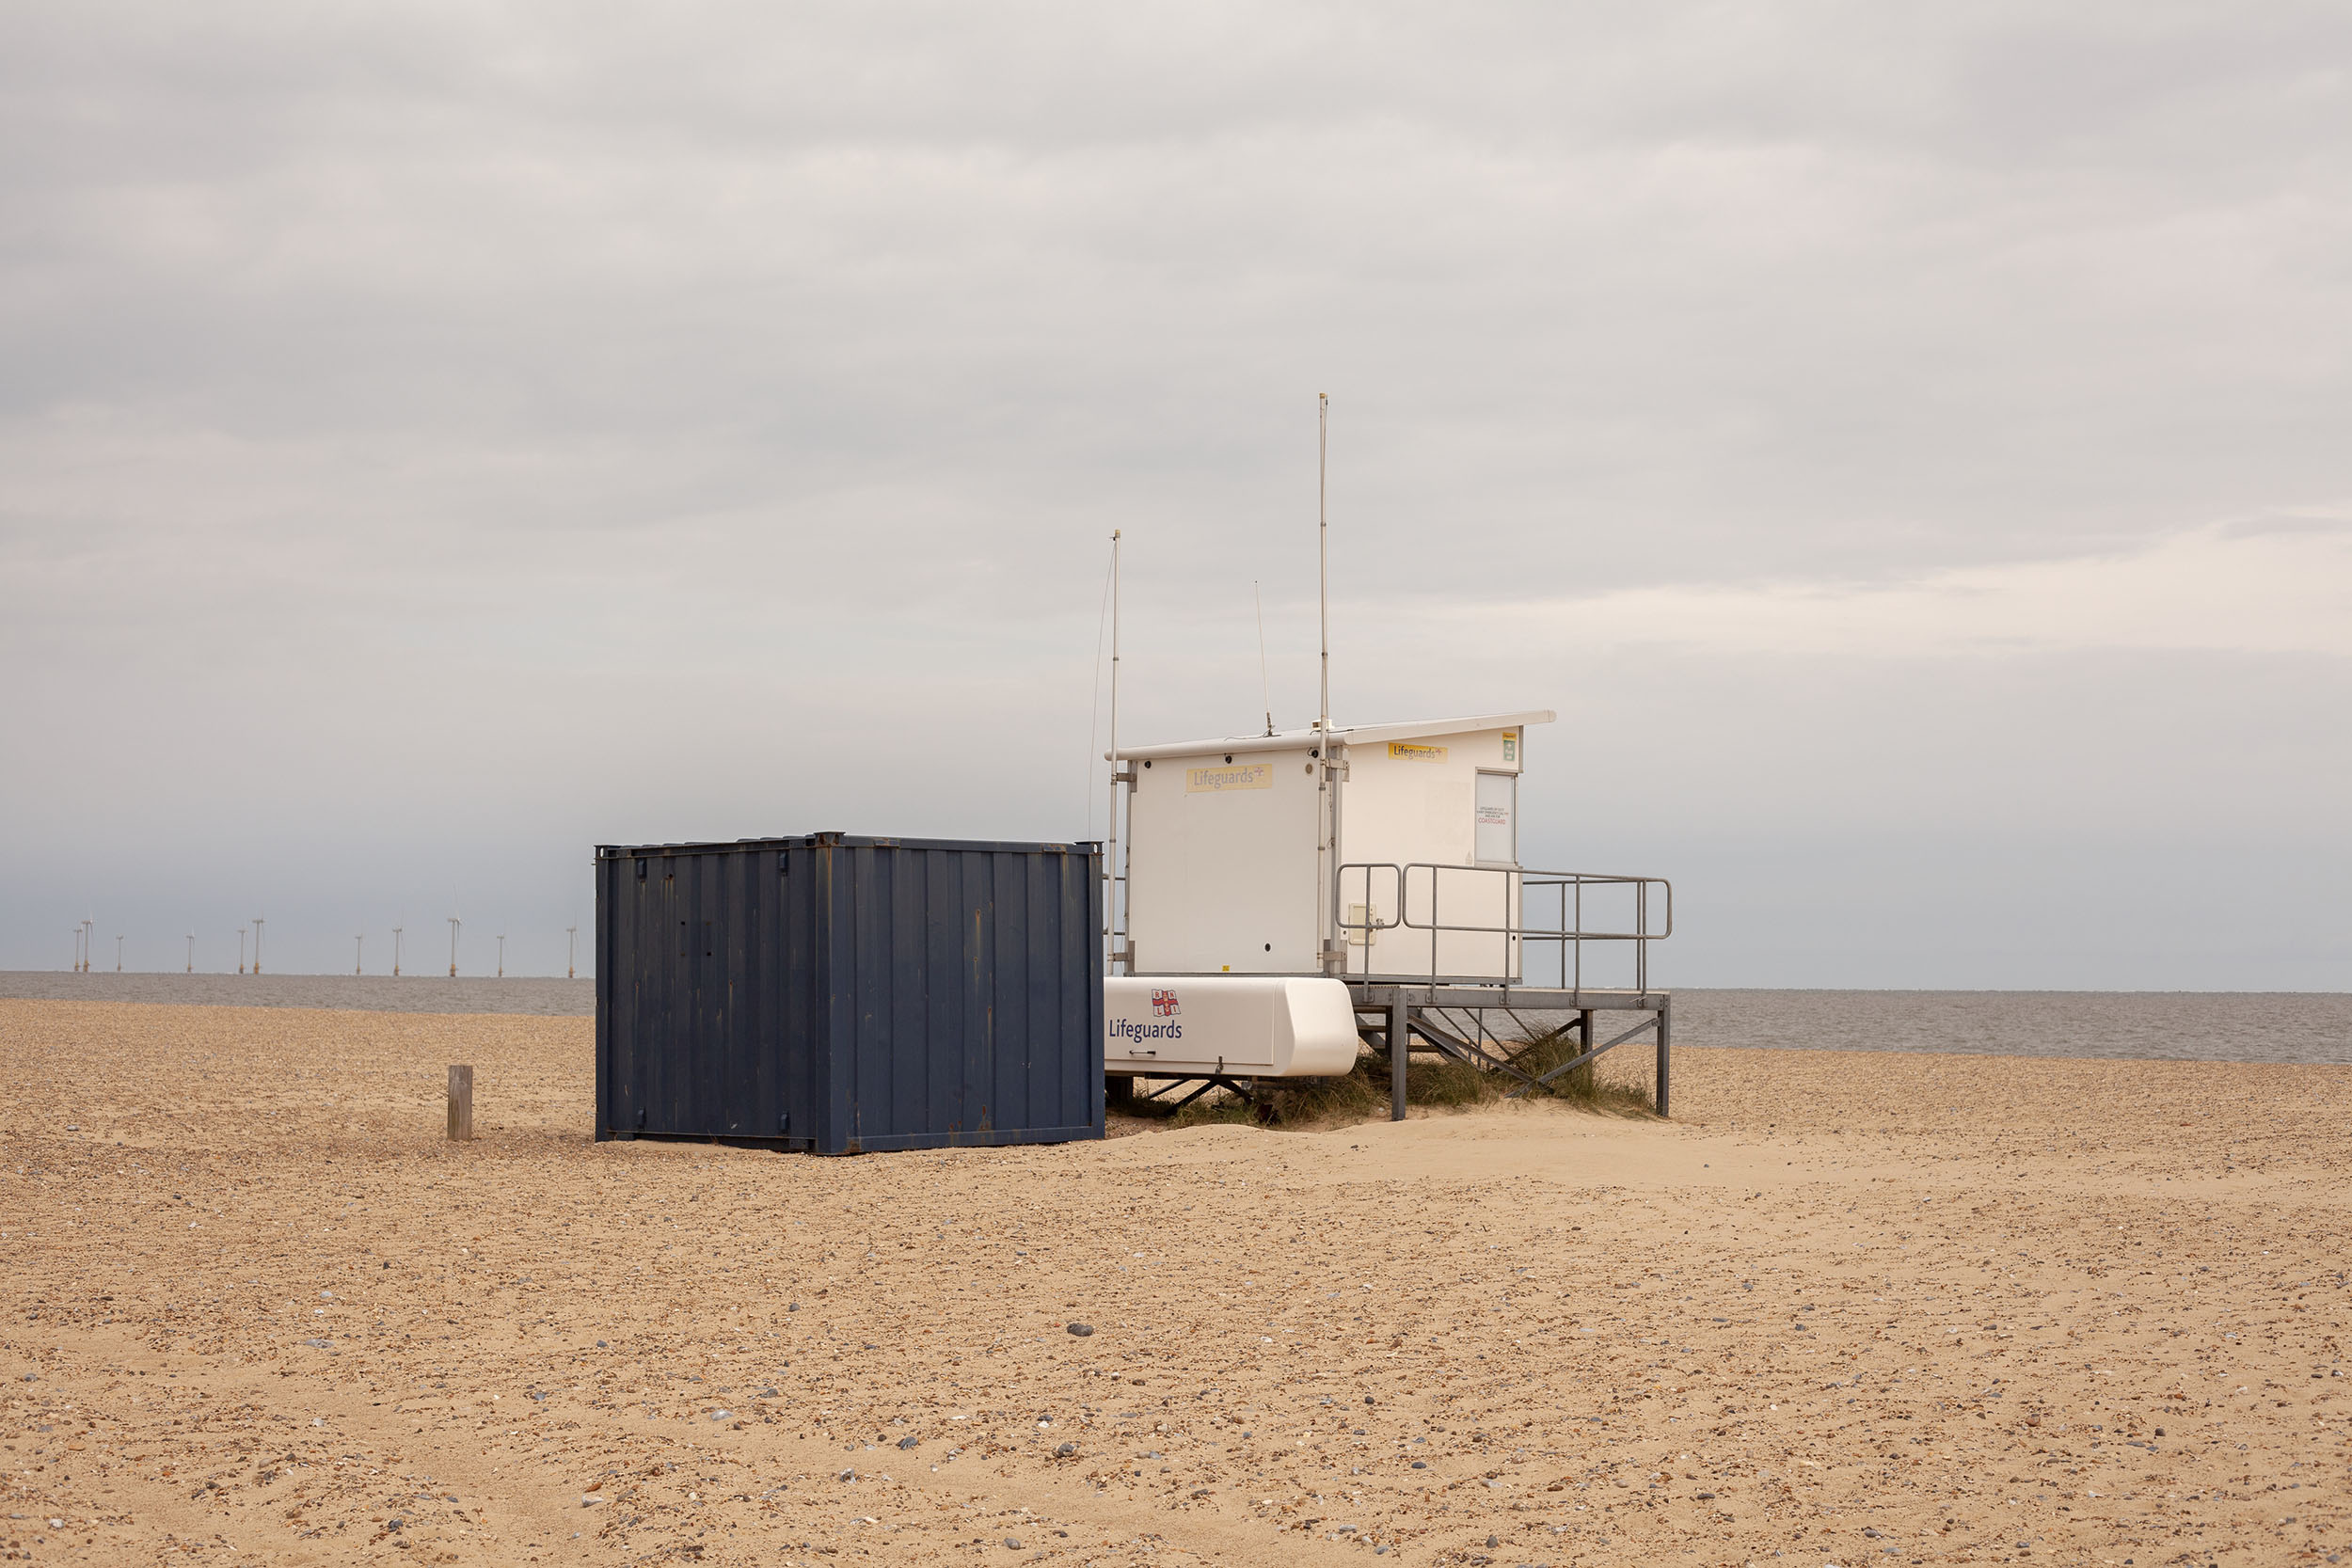 Photograph by Cerys Leahy showing a lifeguard station and container shot central to the beach.